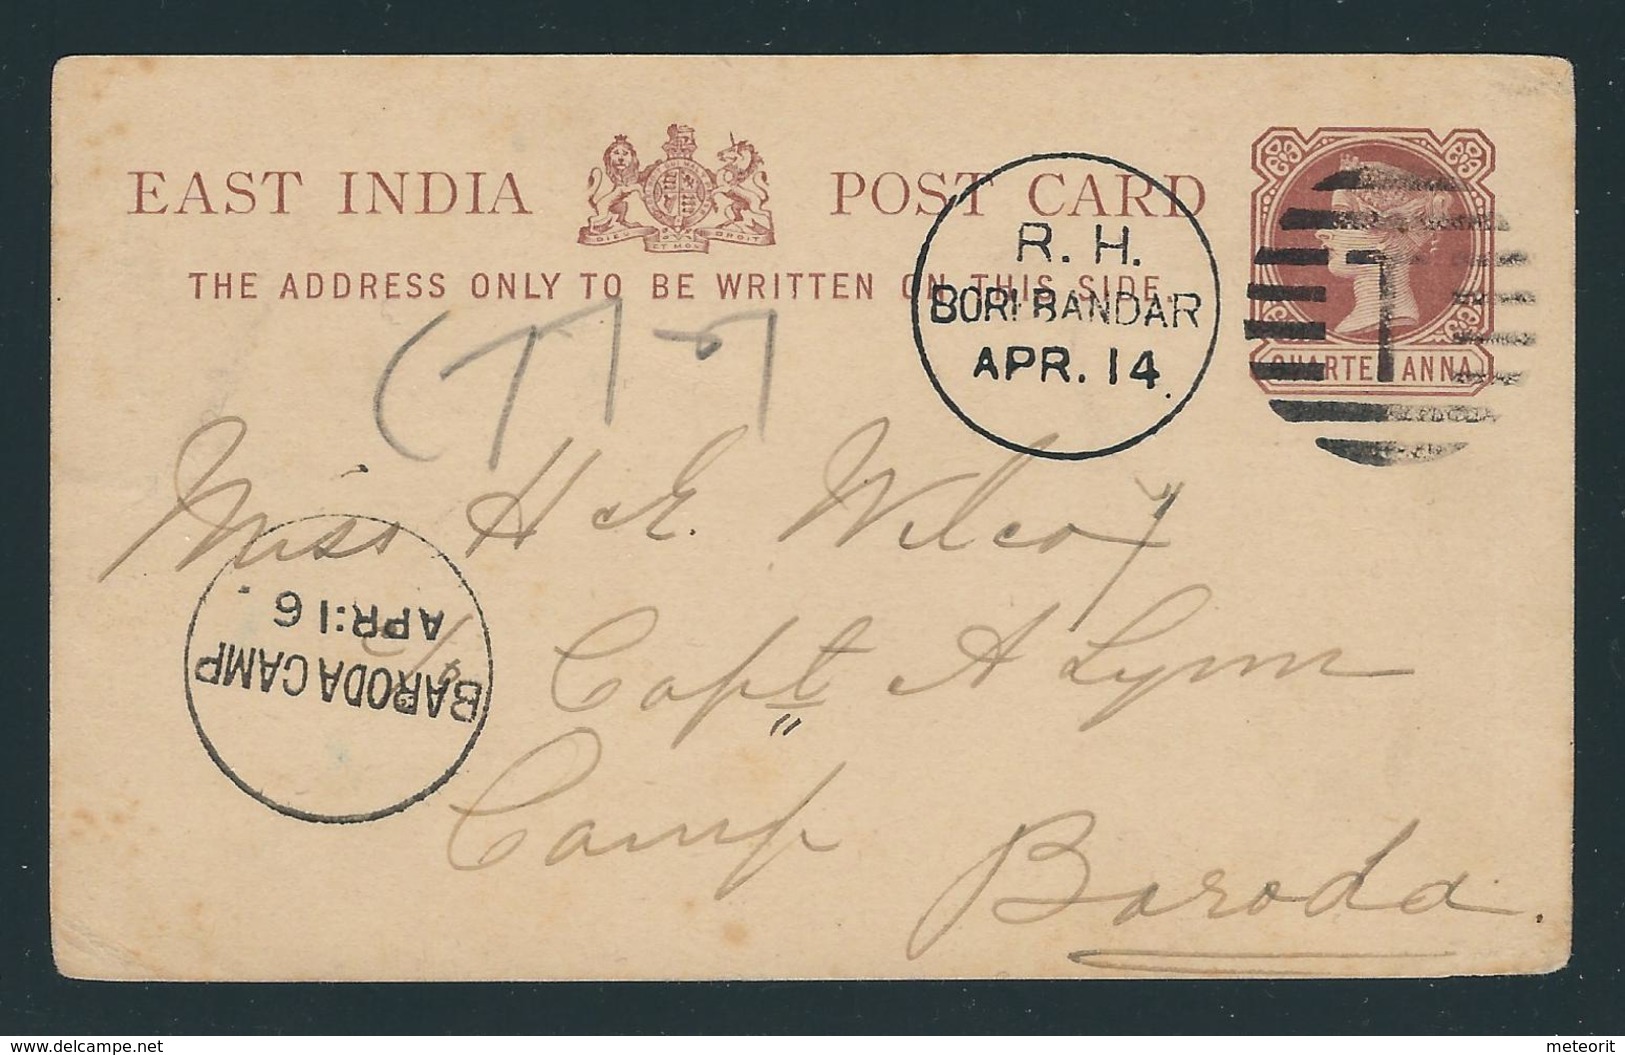 East India 1/4 Anna Stationery Card From R.H. BORI BANDAR APR. 14 To BARODA CAMP APR:16 - Unclassified